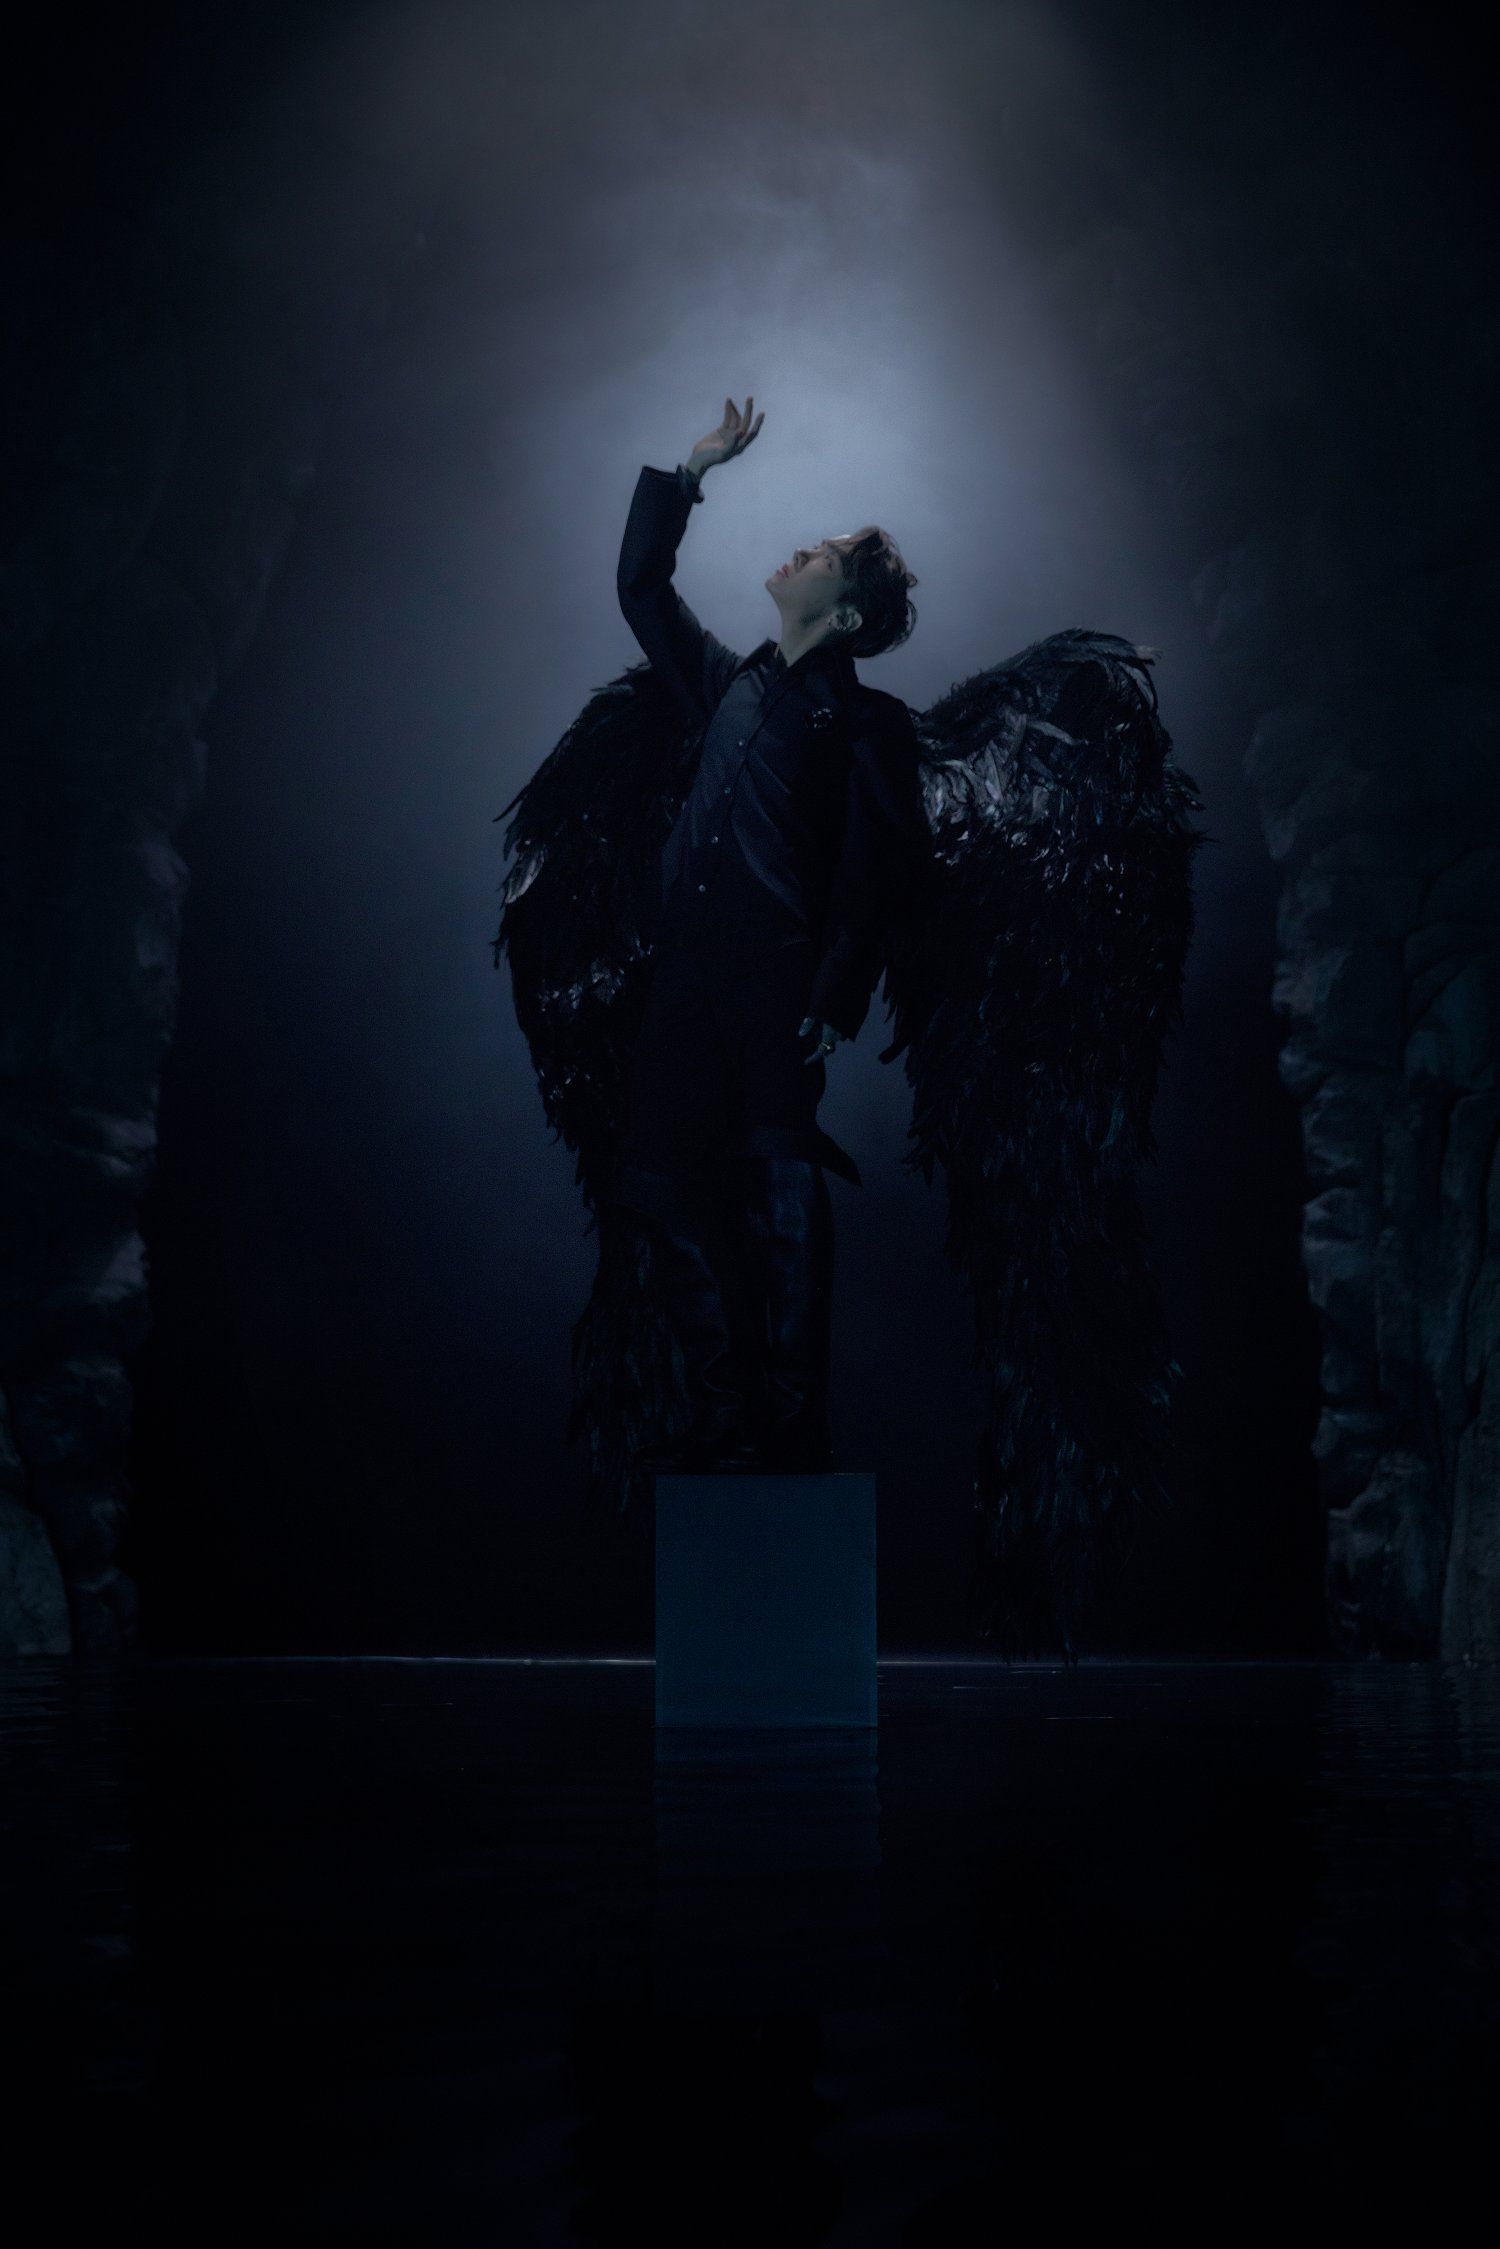 BTS Transforms Into Black Swans For “Map Of The Soul: 7” Concept